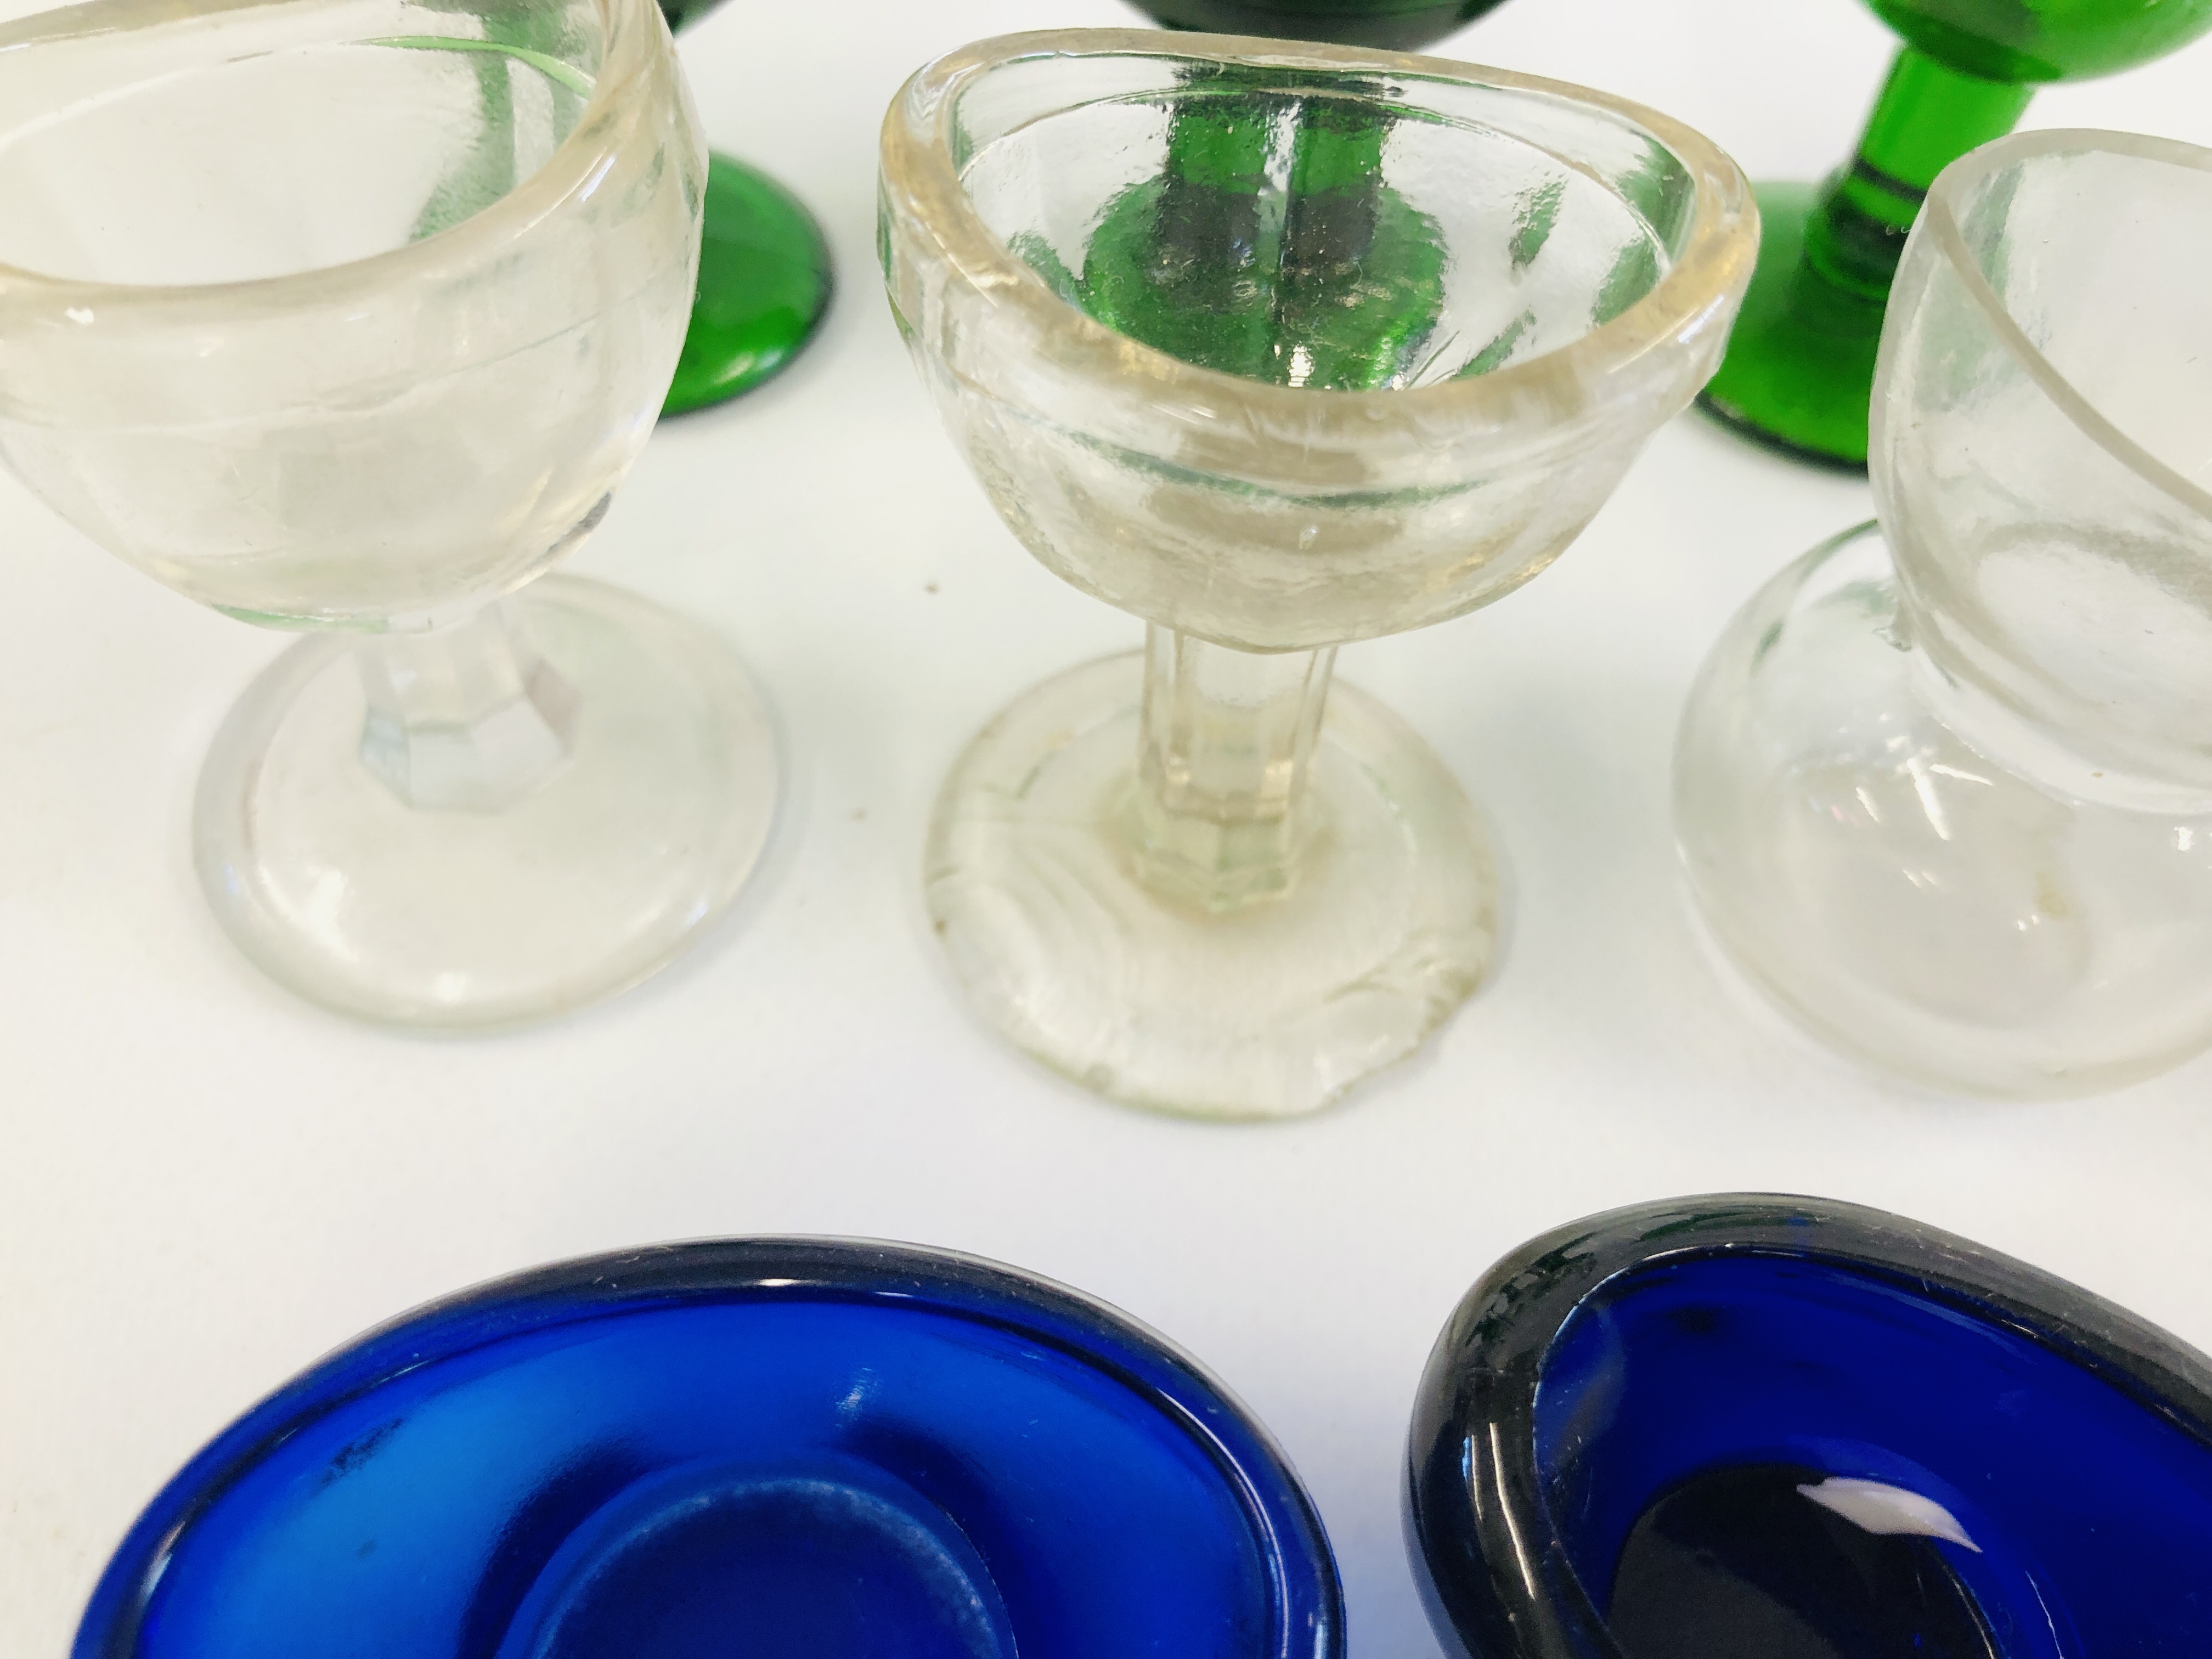 A COLLECTION OF MAINLY VINTAGE GLASS EYE BATHS TO INCLUDE CLEAR GLASS ALONG WITH BLUE AND GREEN - Image 8 of 8